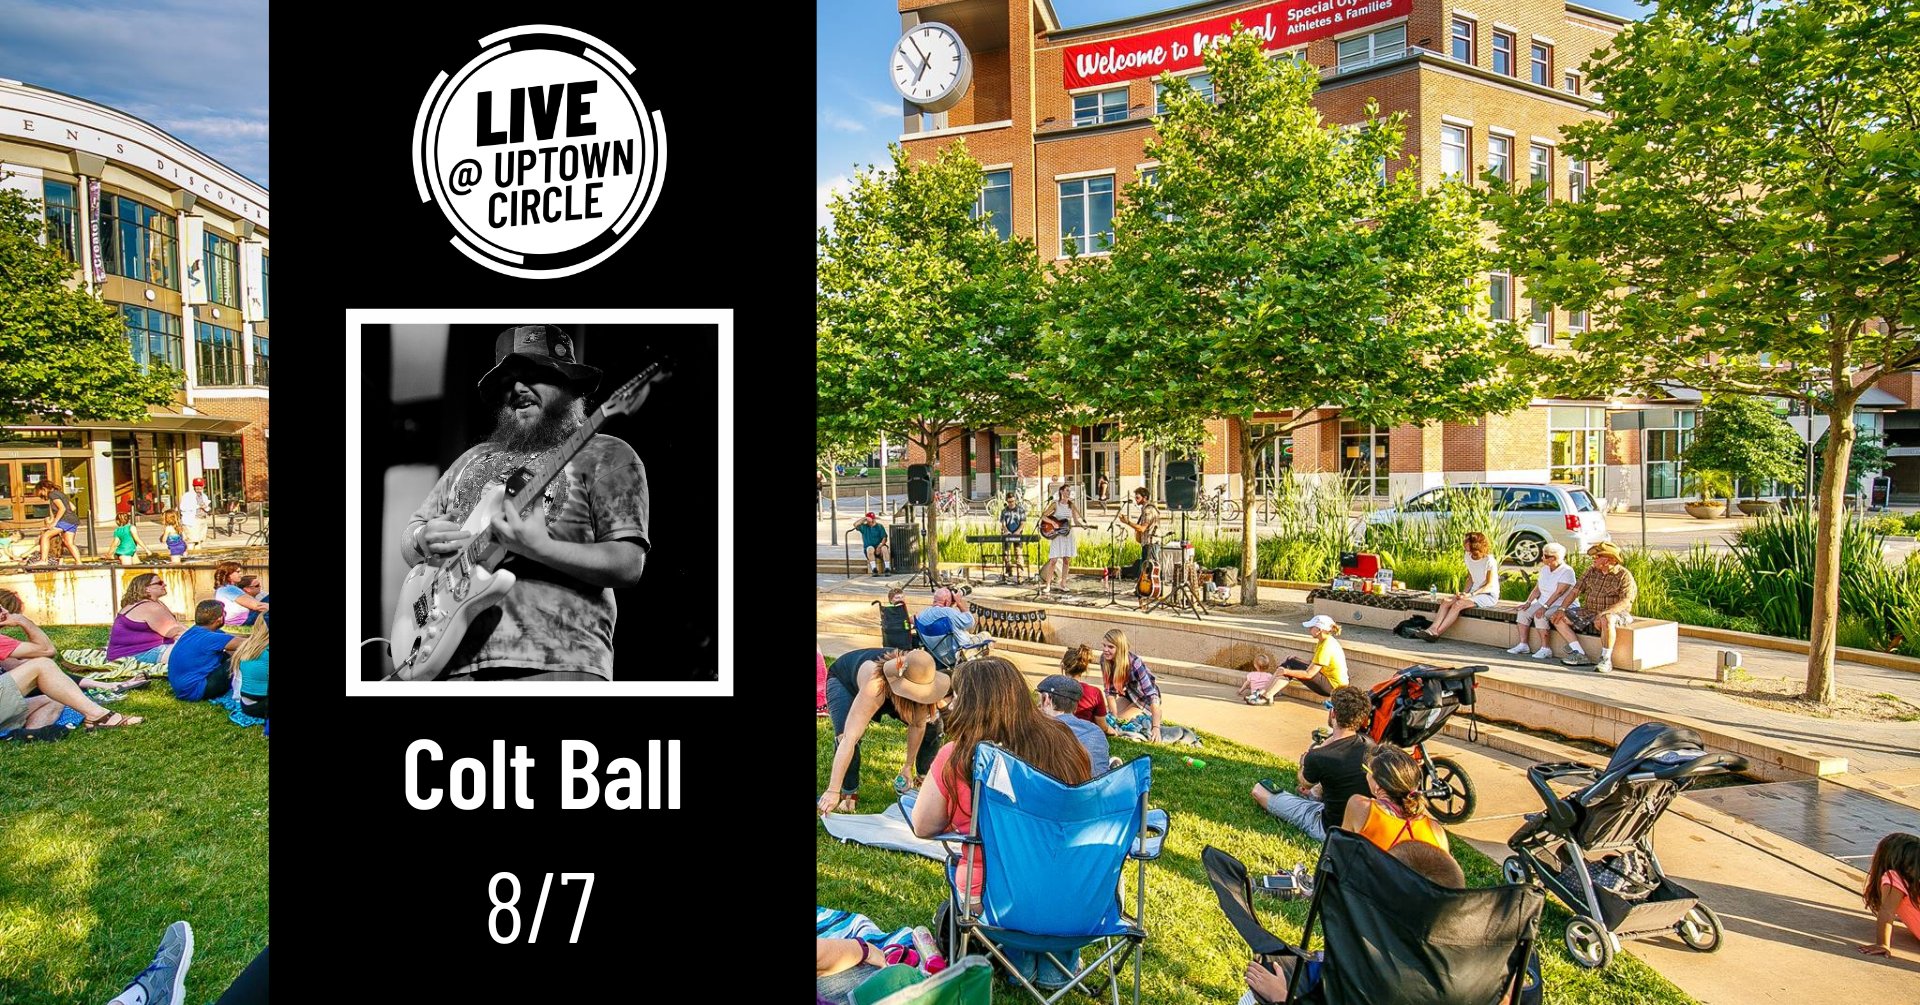 Normal LIVE presents Colt Ball @ Uptown Circle